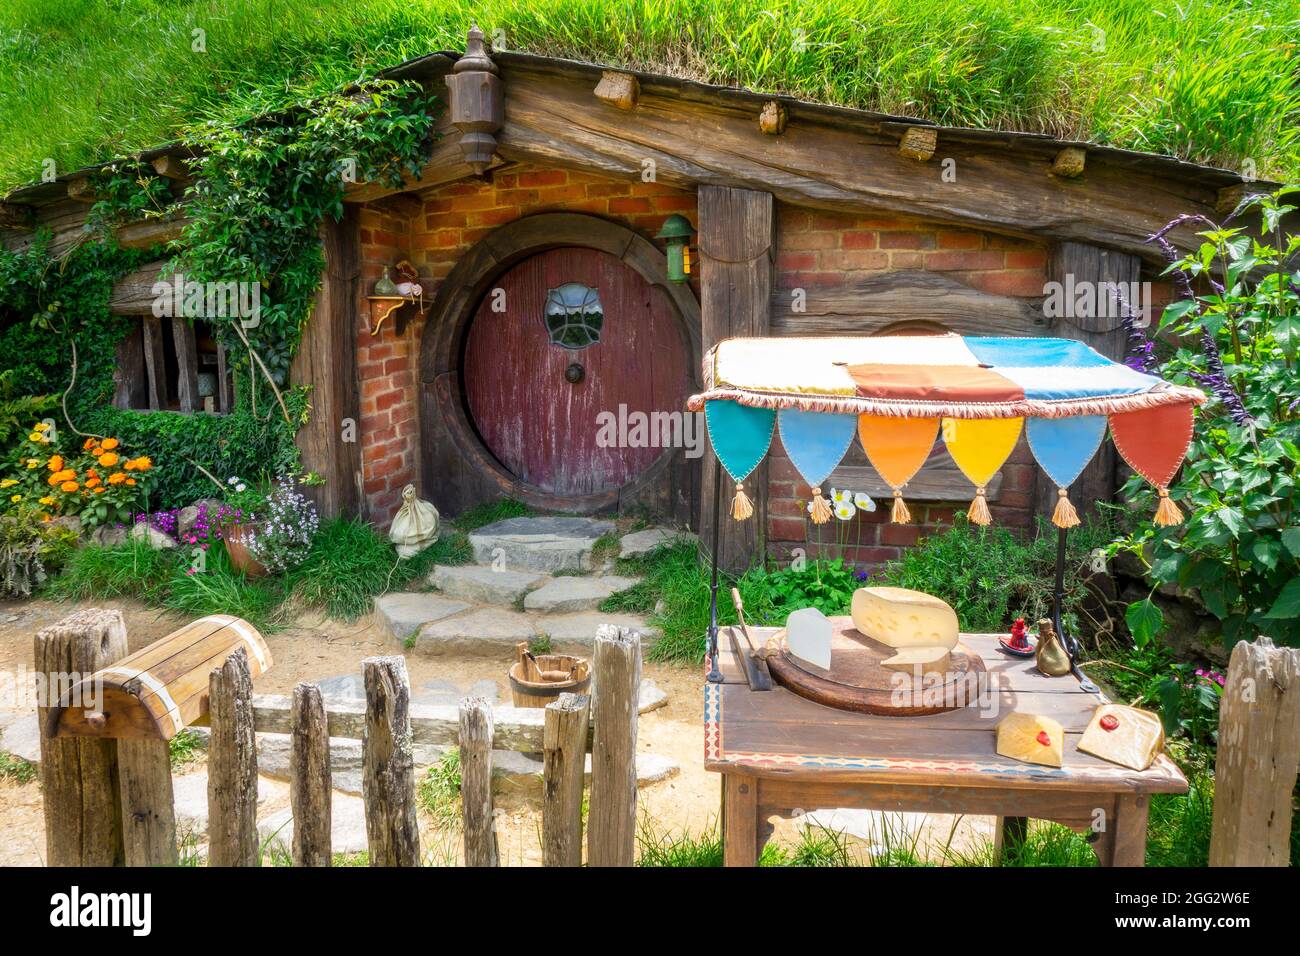 Hobbit Holes Homes On The Hobbiton Movie Set For The Lord Of The Rings Movie Trilogy In Matamata New Zealand A Popular Tourist Attraction Stock Photo